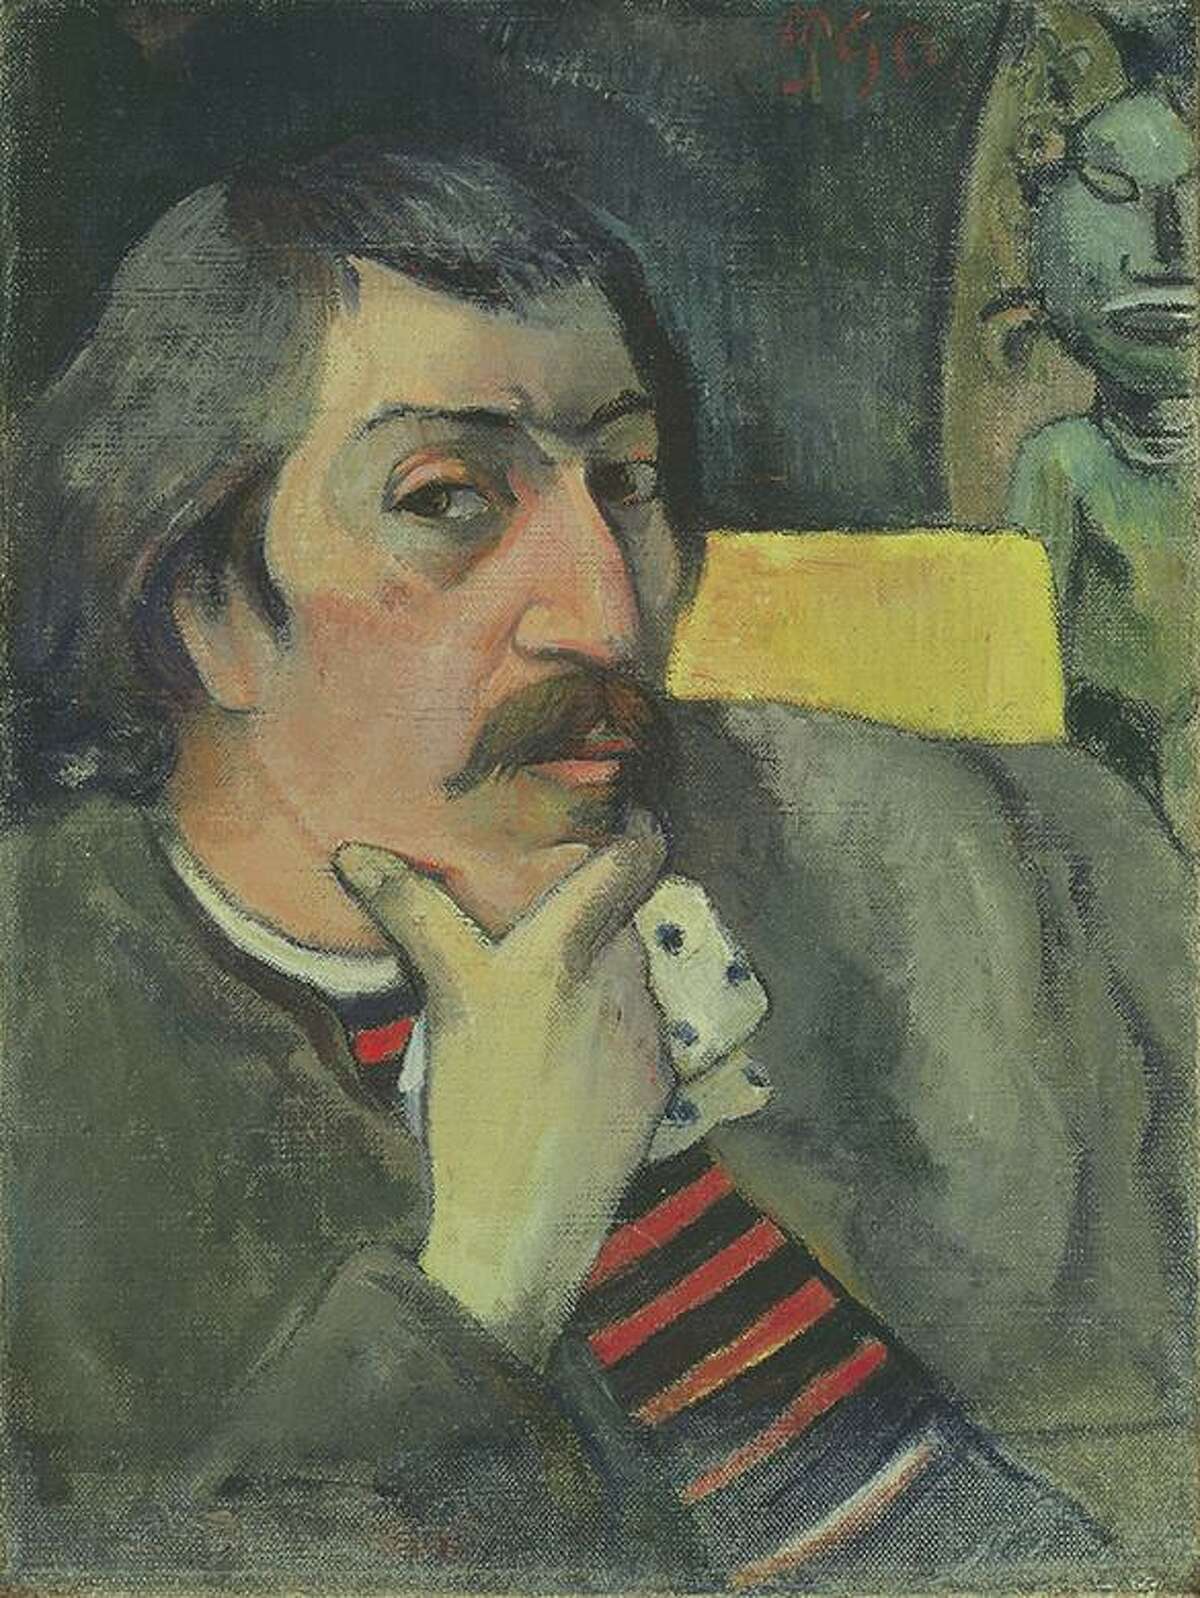 Paul Gauguin's "Portrait of the Artist with the Idol," circa 1893, was part of the original bequest of Marion Koogler McNay.